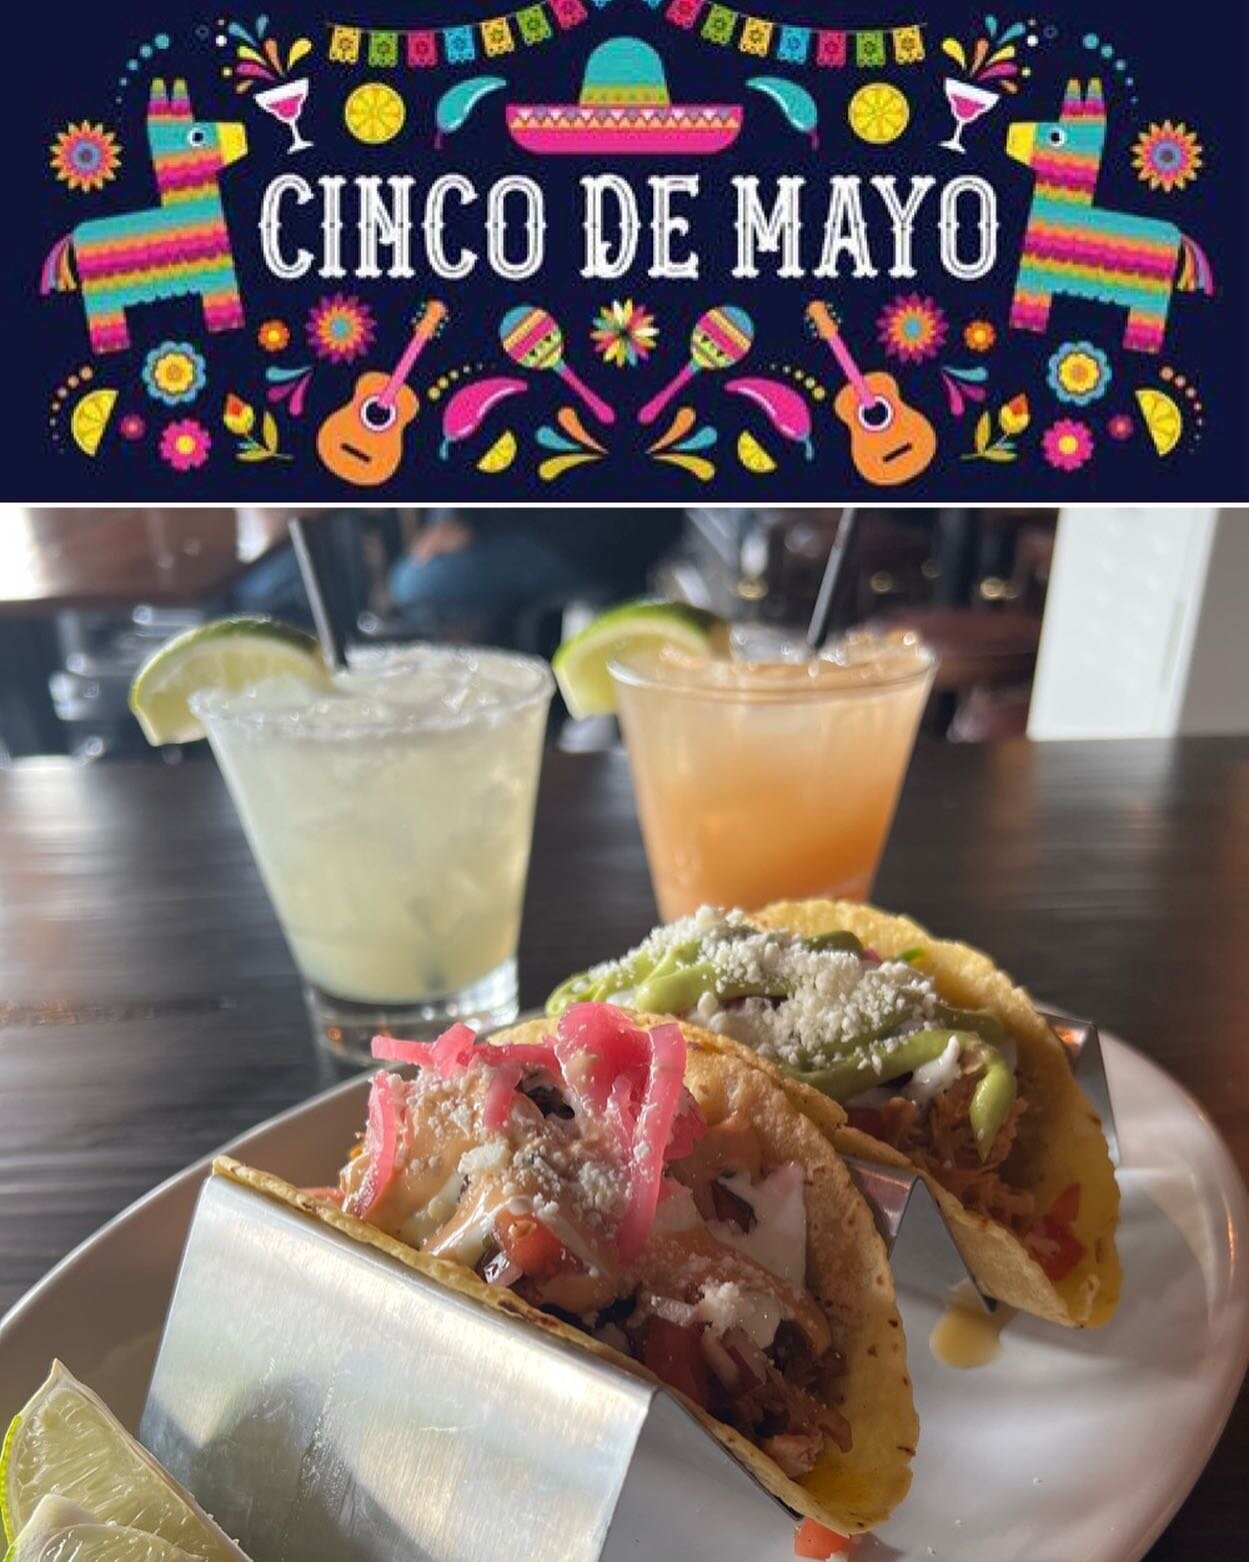 Happy cinco de Mayo!  Come out to the SFAC and enjoy some specials today starting at 5pm! $10 Cenote blanco margaritas and Palomas.  We also have $5 tacos!  @thesfac @el____burro #cincodemayo #cenotetequila #margaritas #palomas #tacos #fridayvibes #b